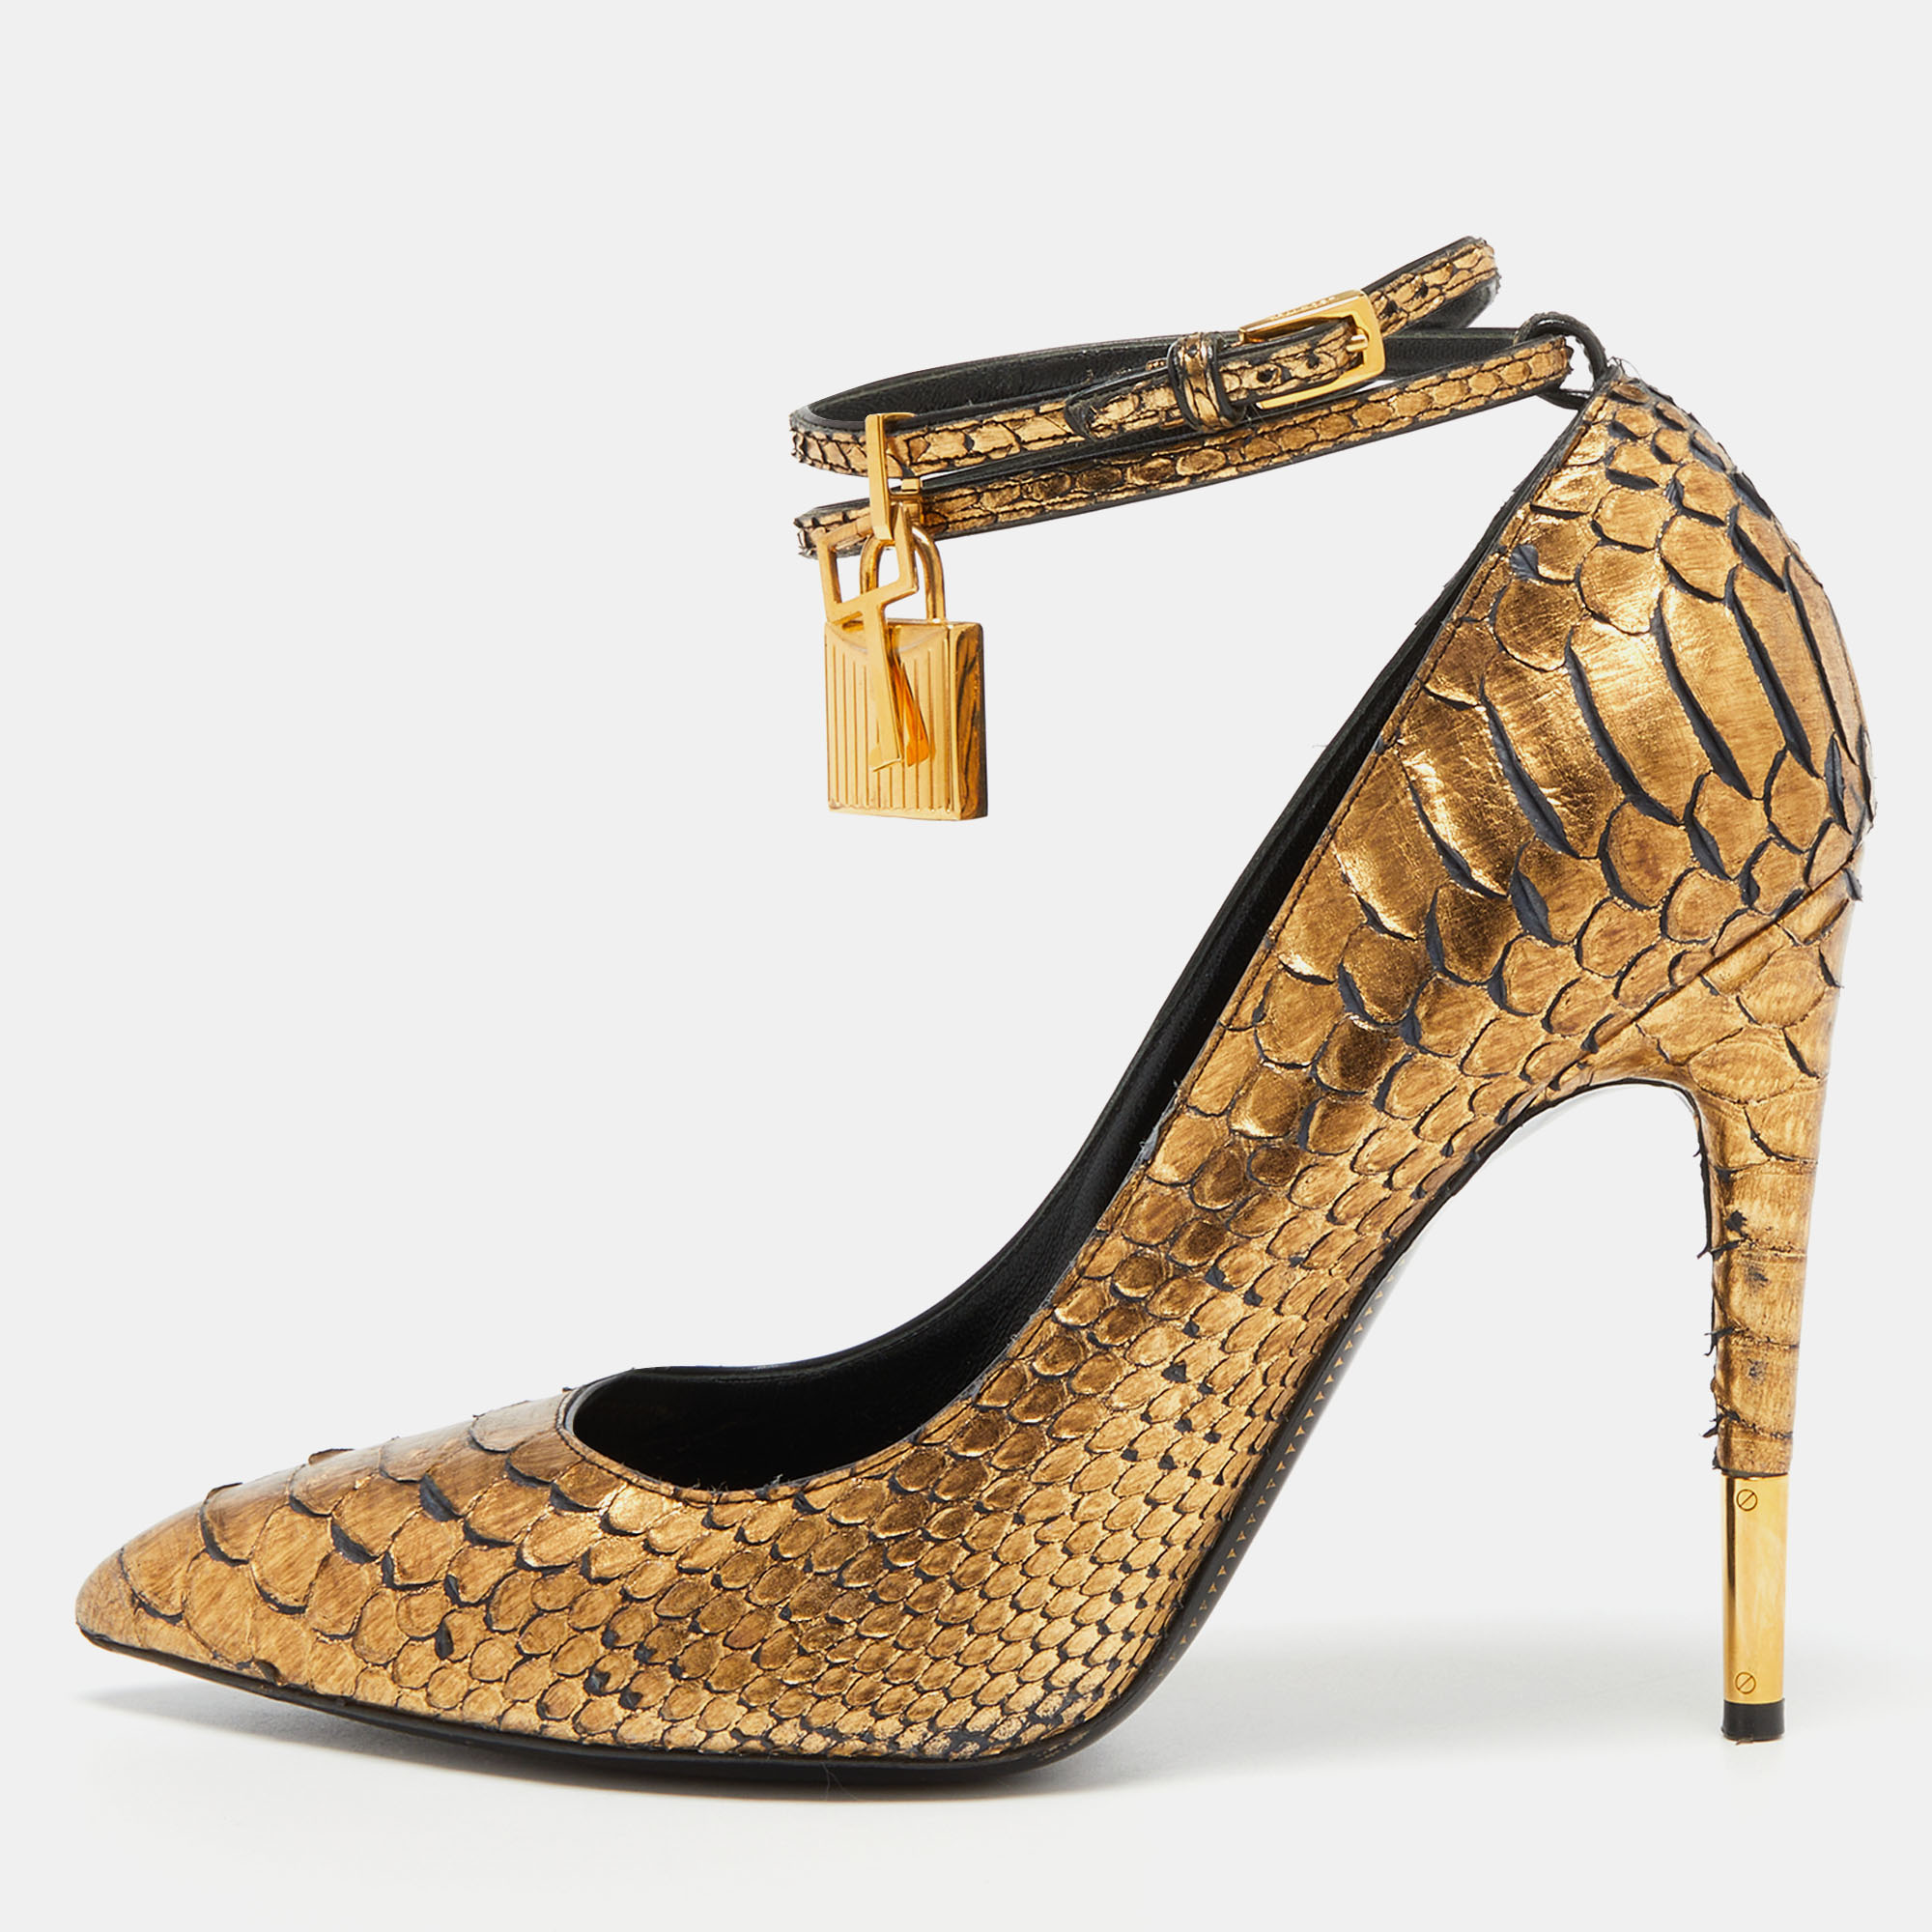 Tom Ford Gold Python Padlock Pointed Toe Pumps Size 38